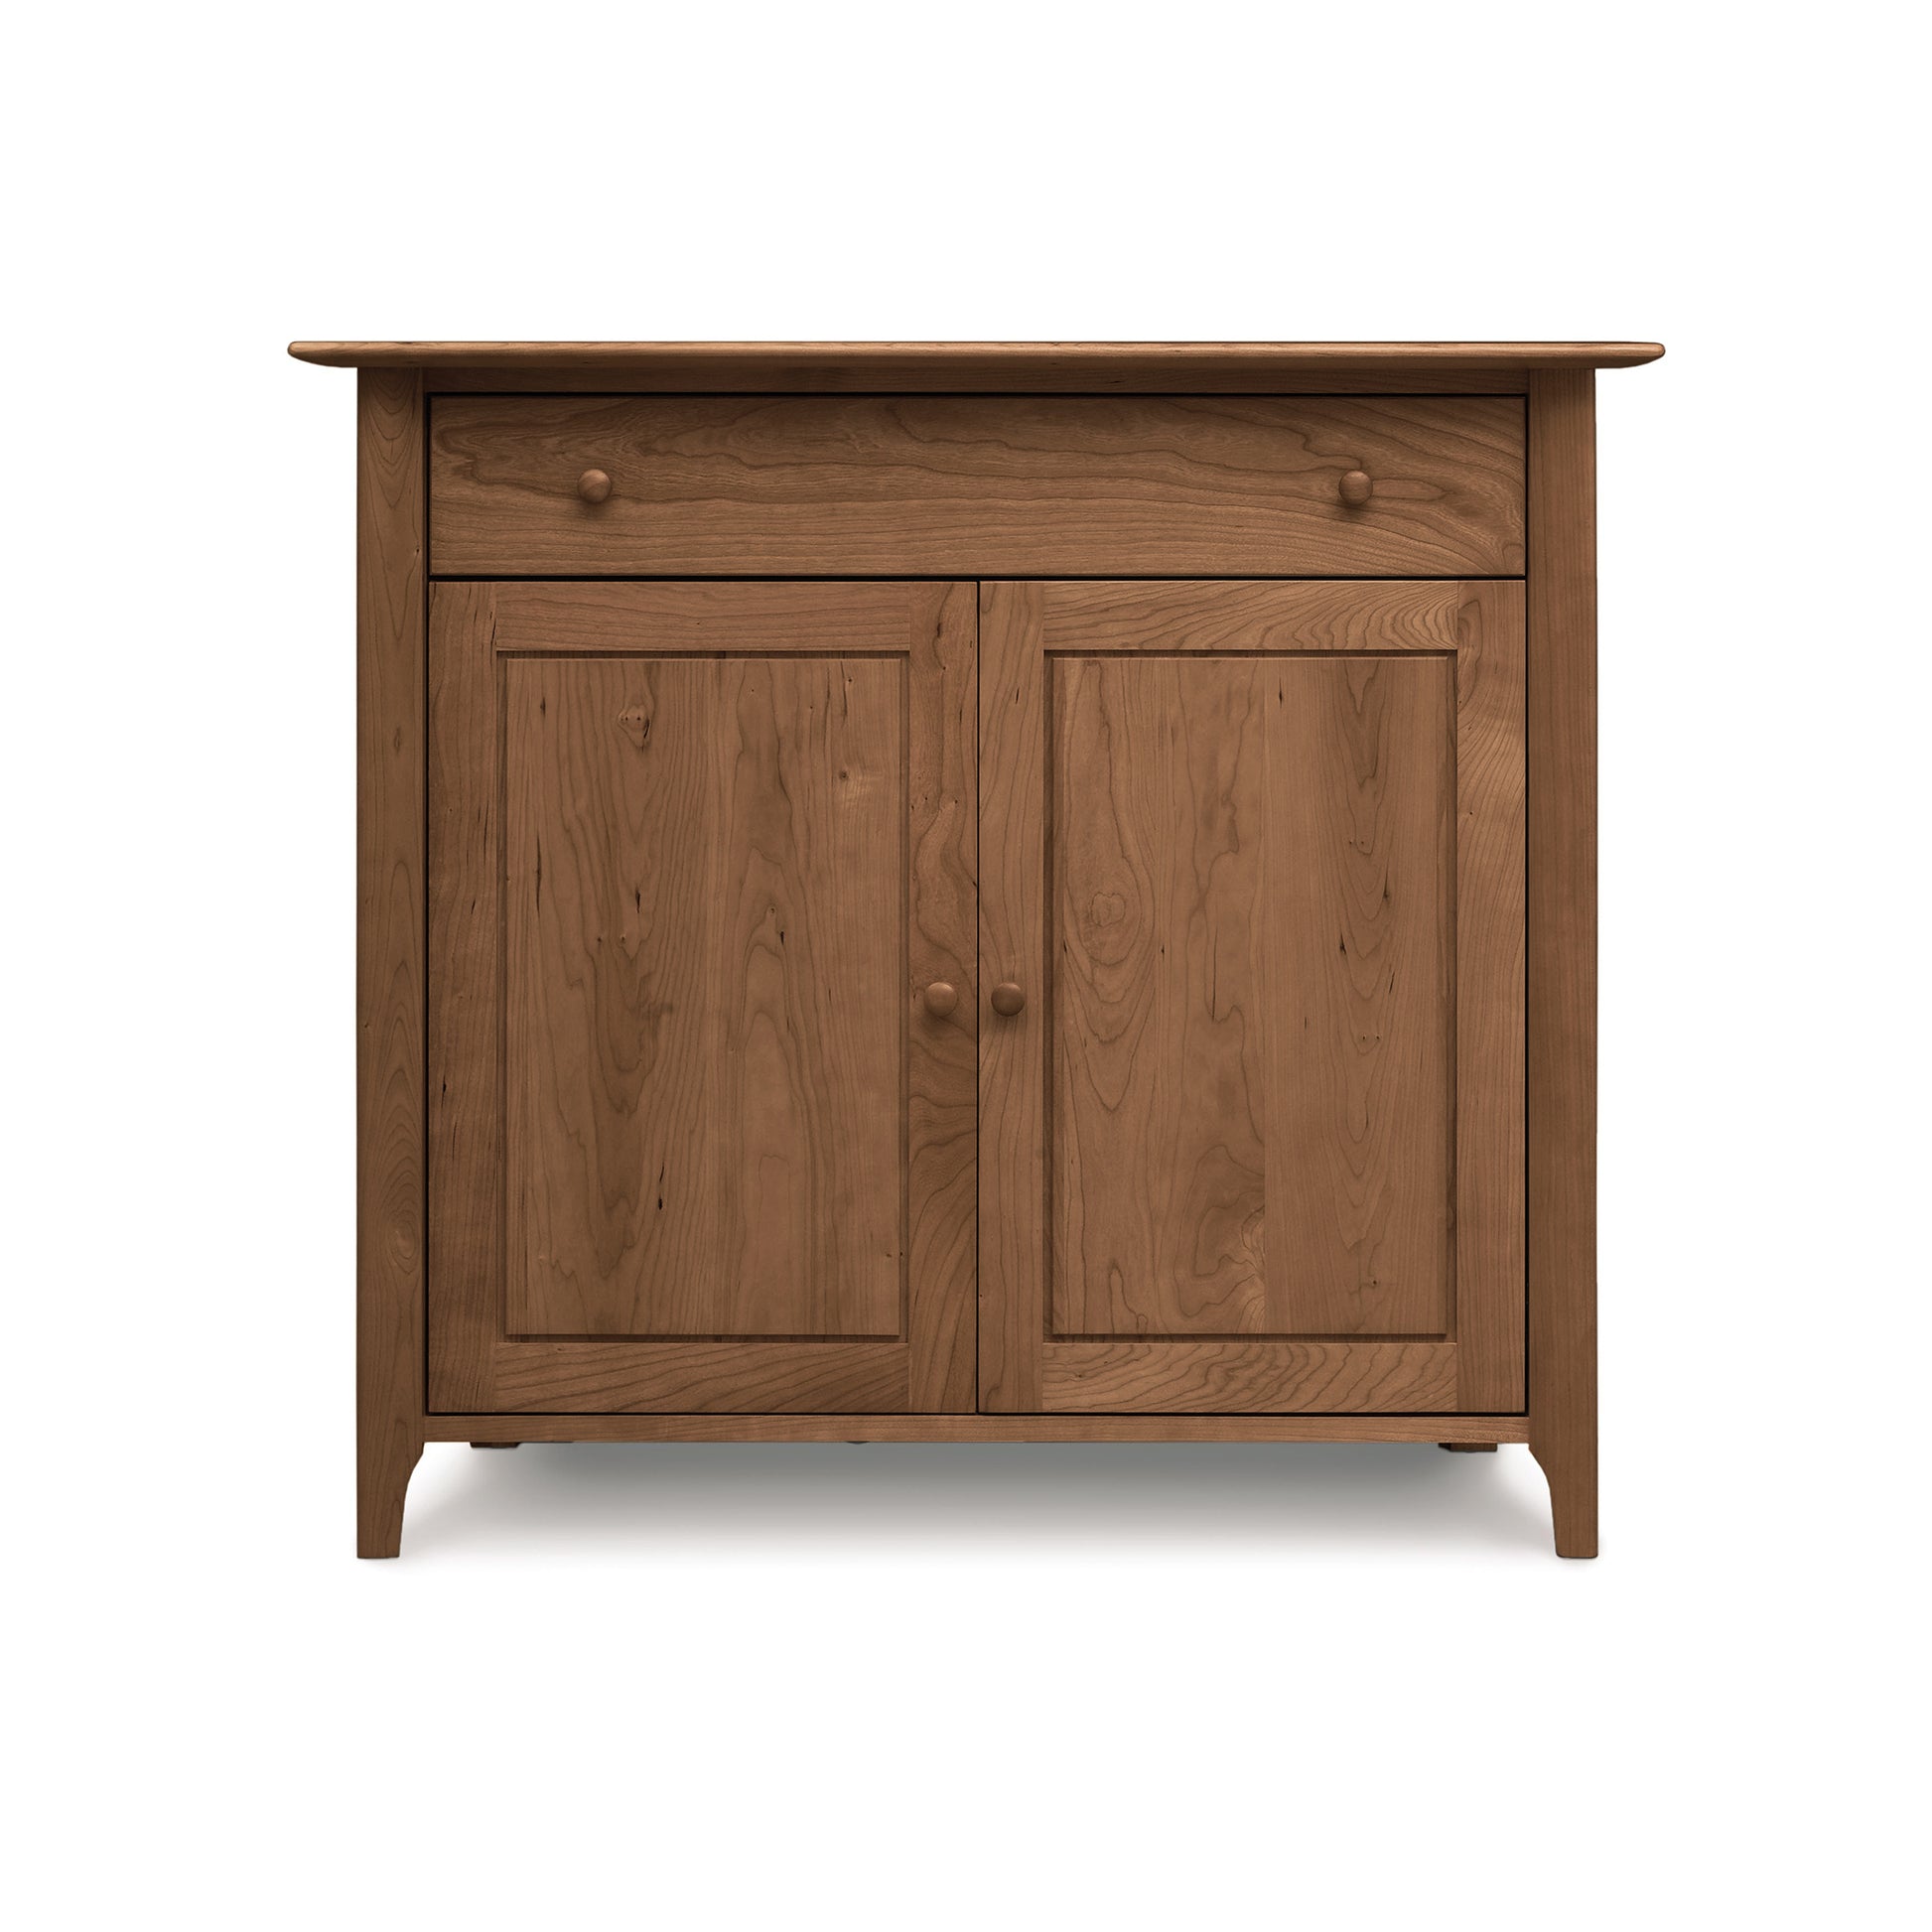 Solid wood Sarah 1-Drawer, 2-Door Buffet on a white background, part of the Copeland Furniture luxury dining furniture collection.